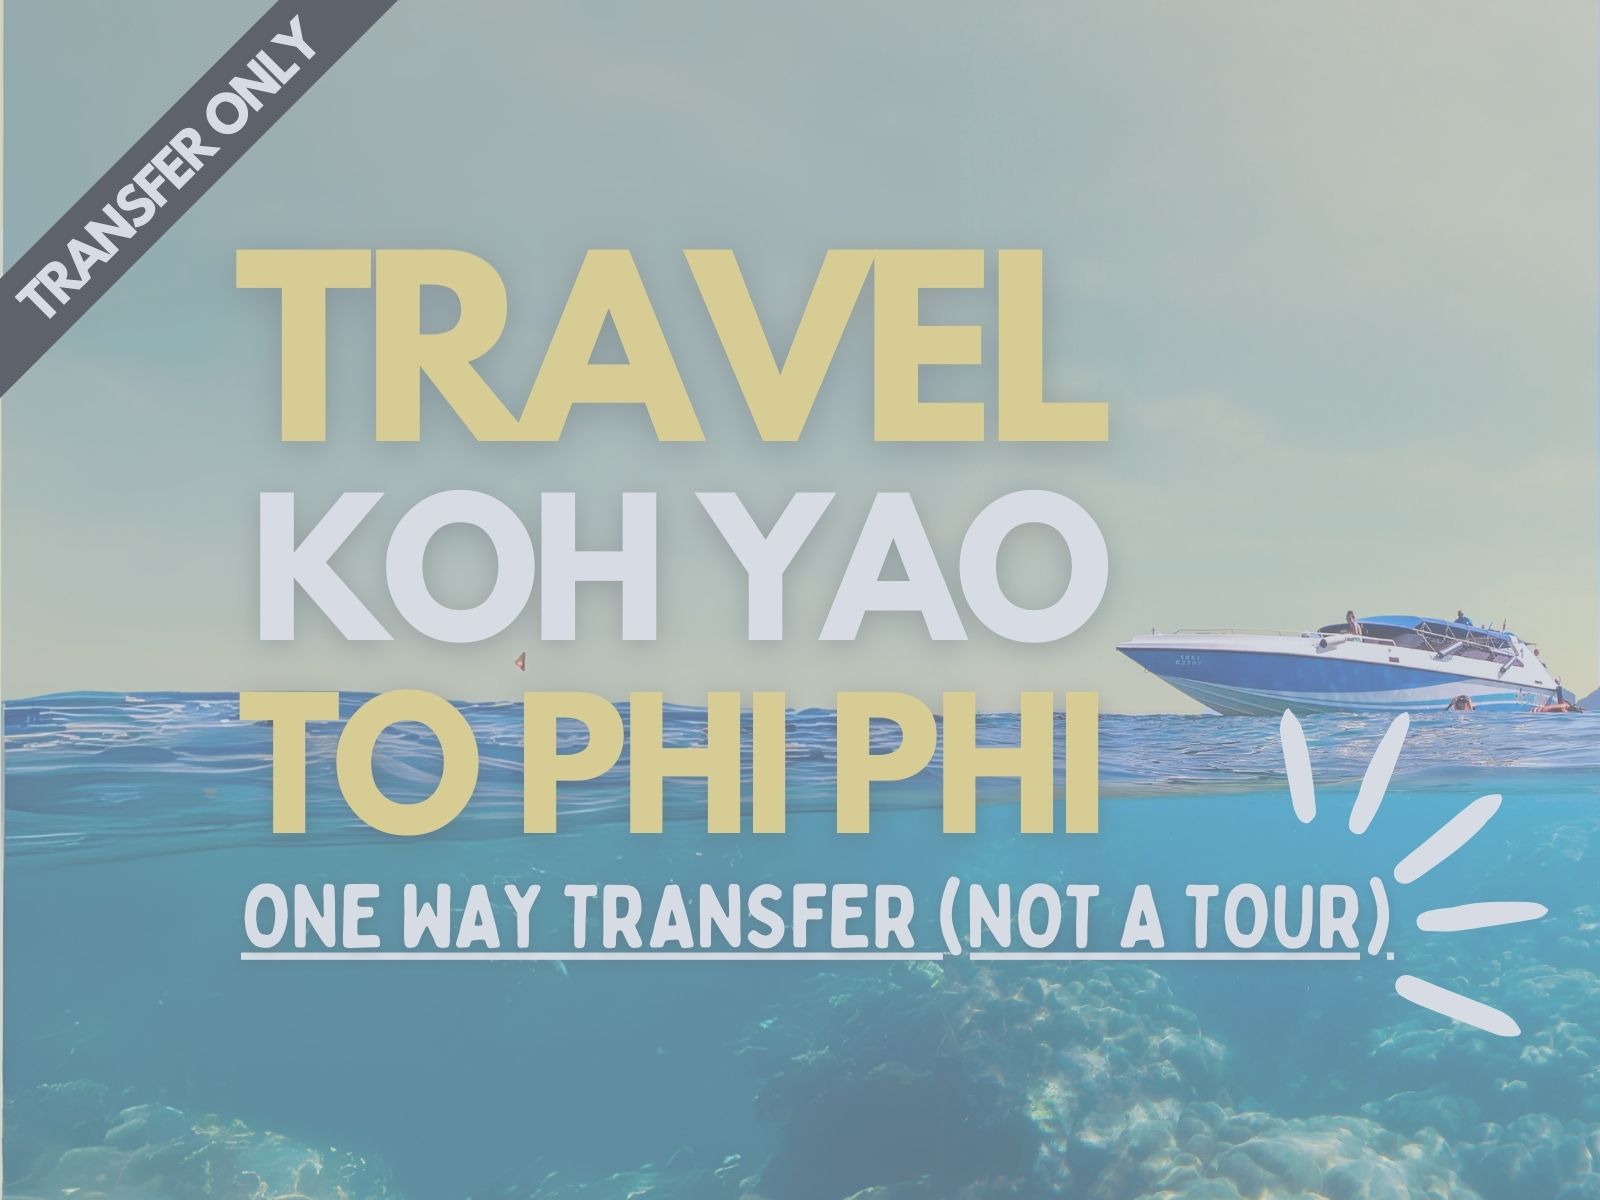 Speedboat transfers One Way Koh Yao to Phi Phi Islands by Speedboat not a tour